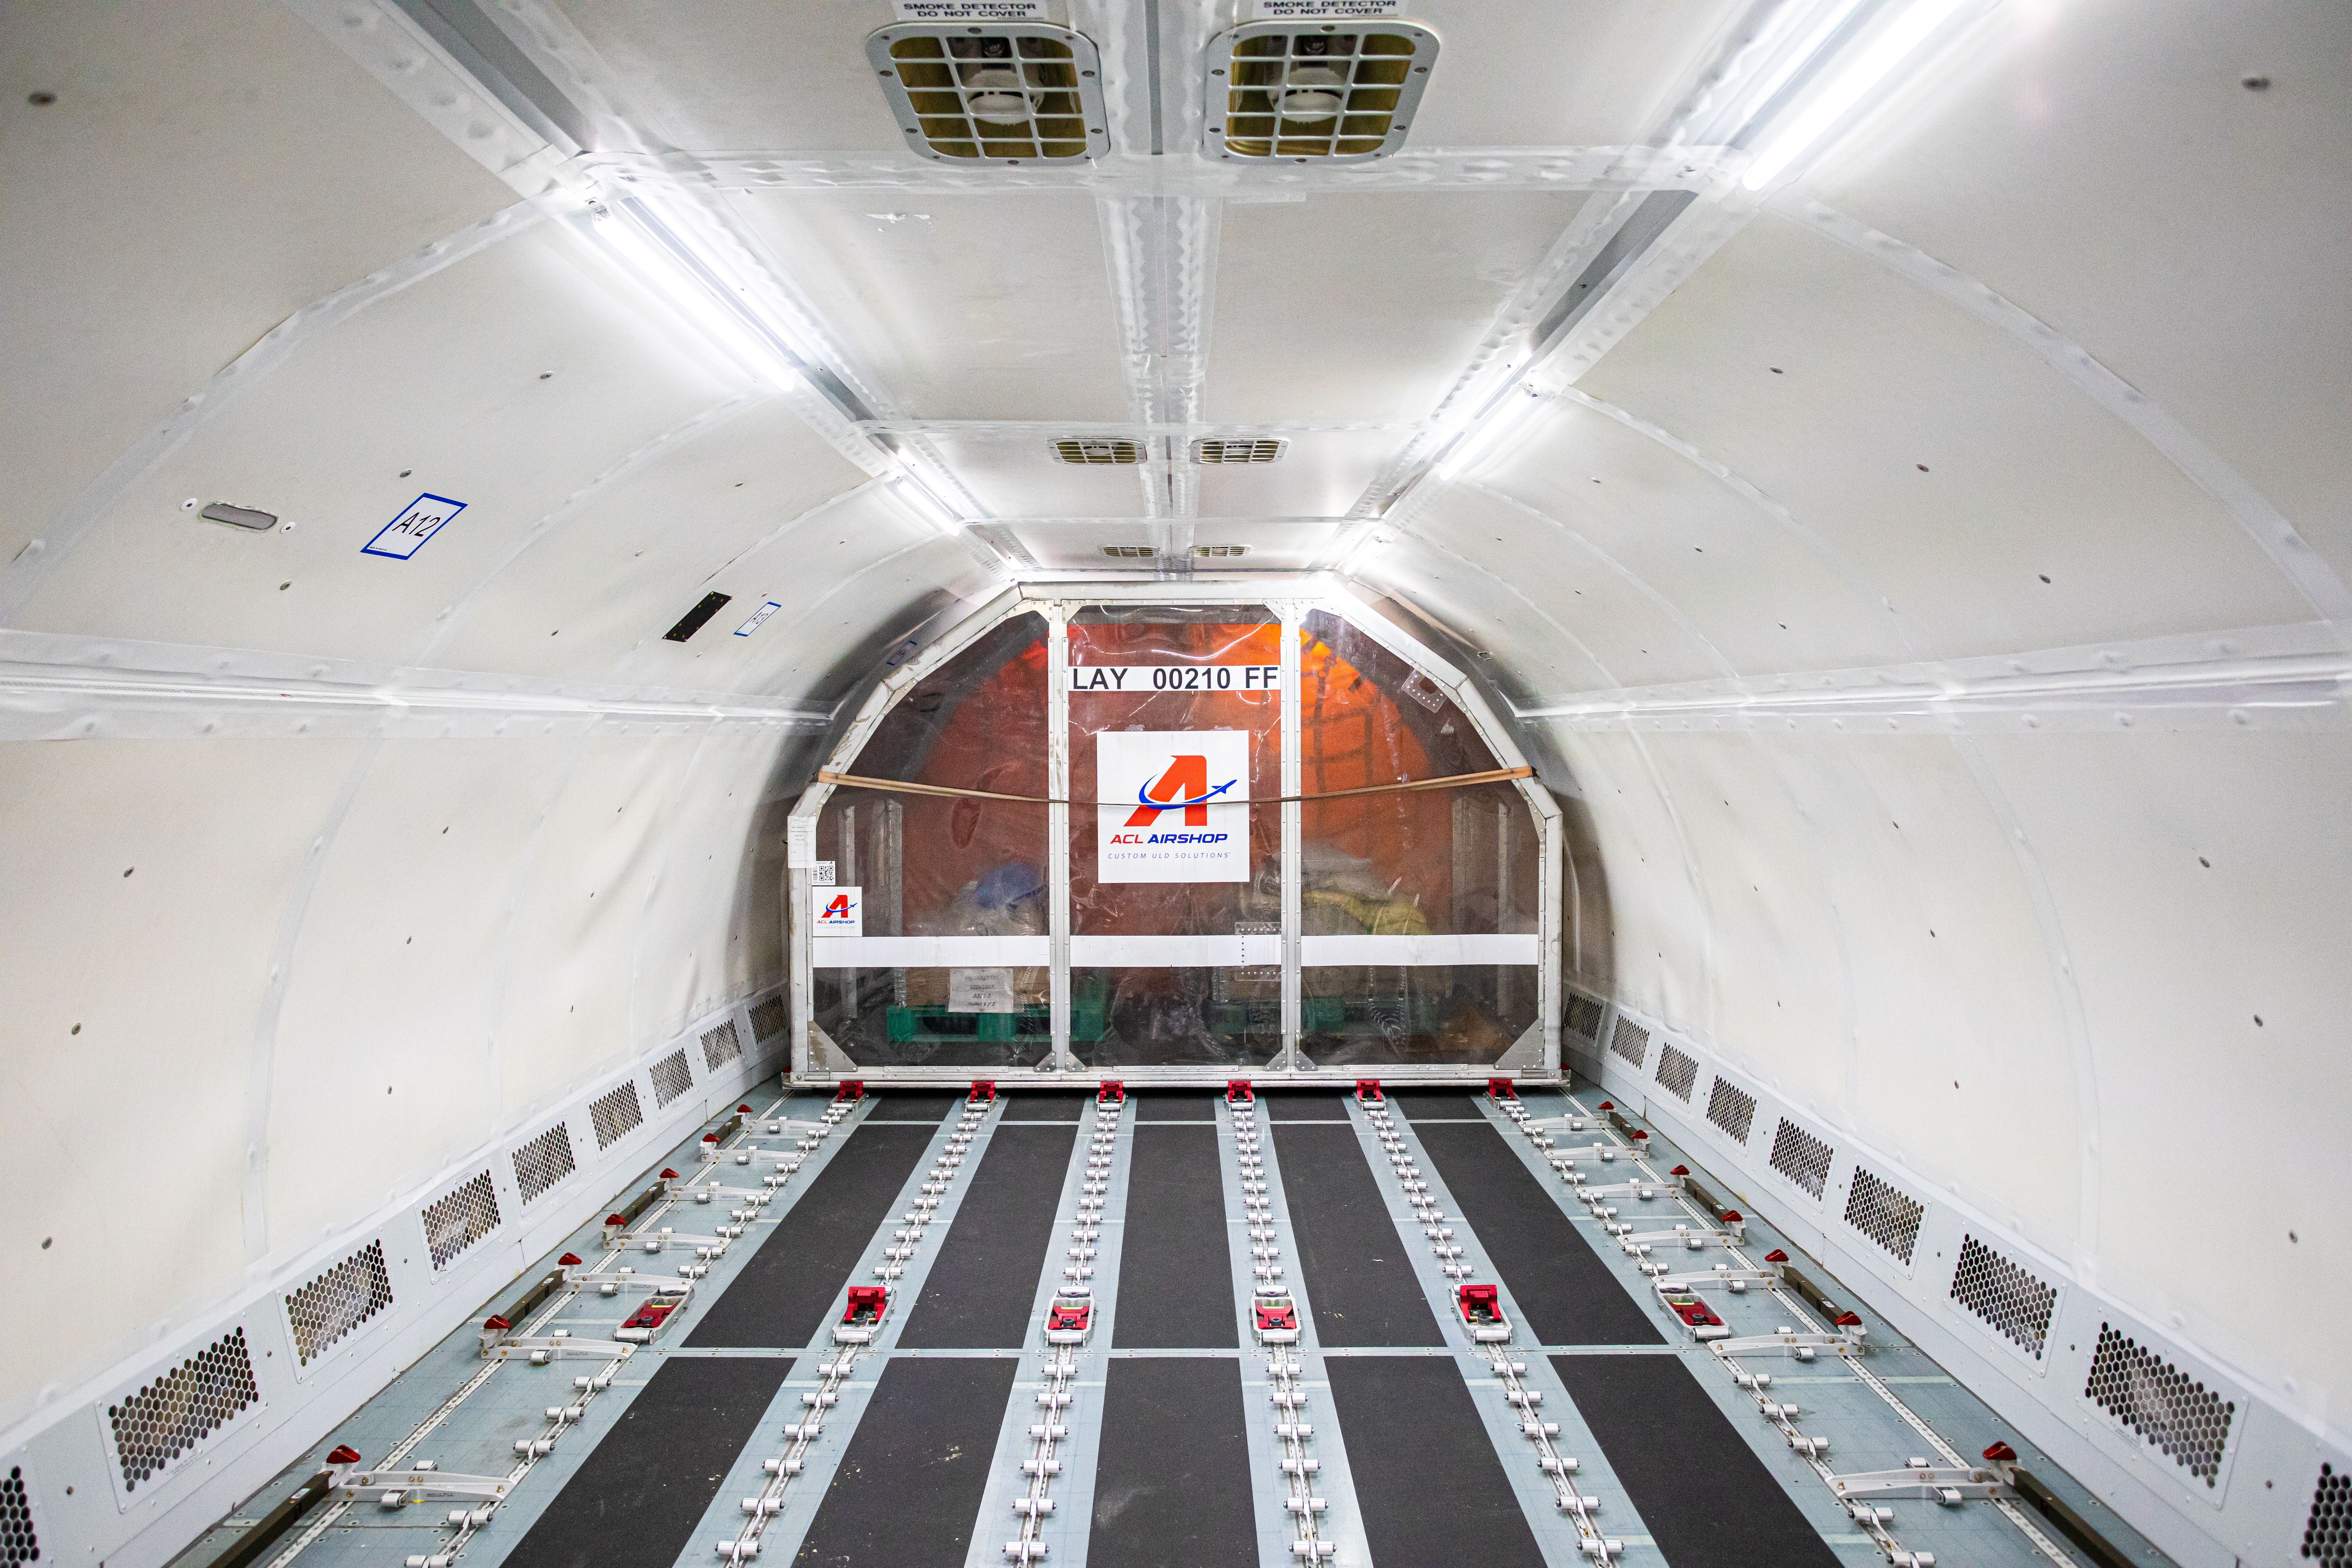 Inside the cargo area of an Airbus A321 P2F Freighter.